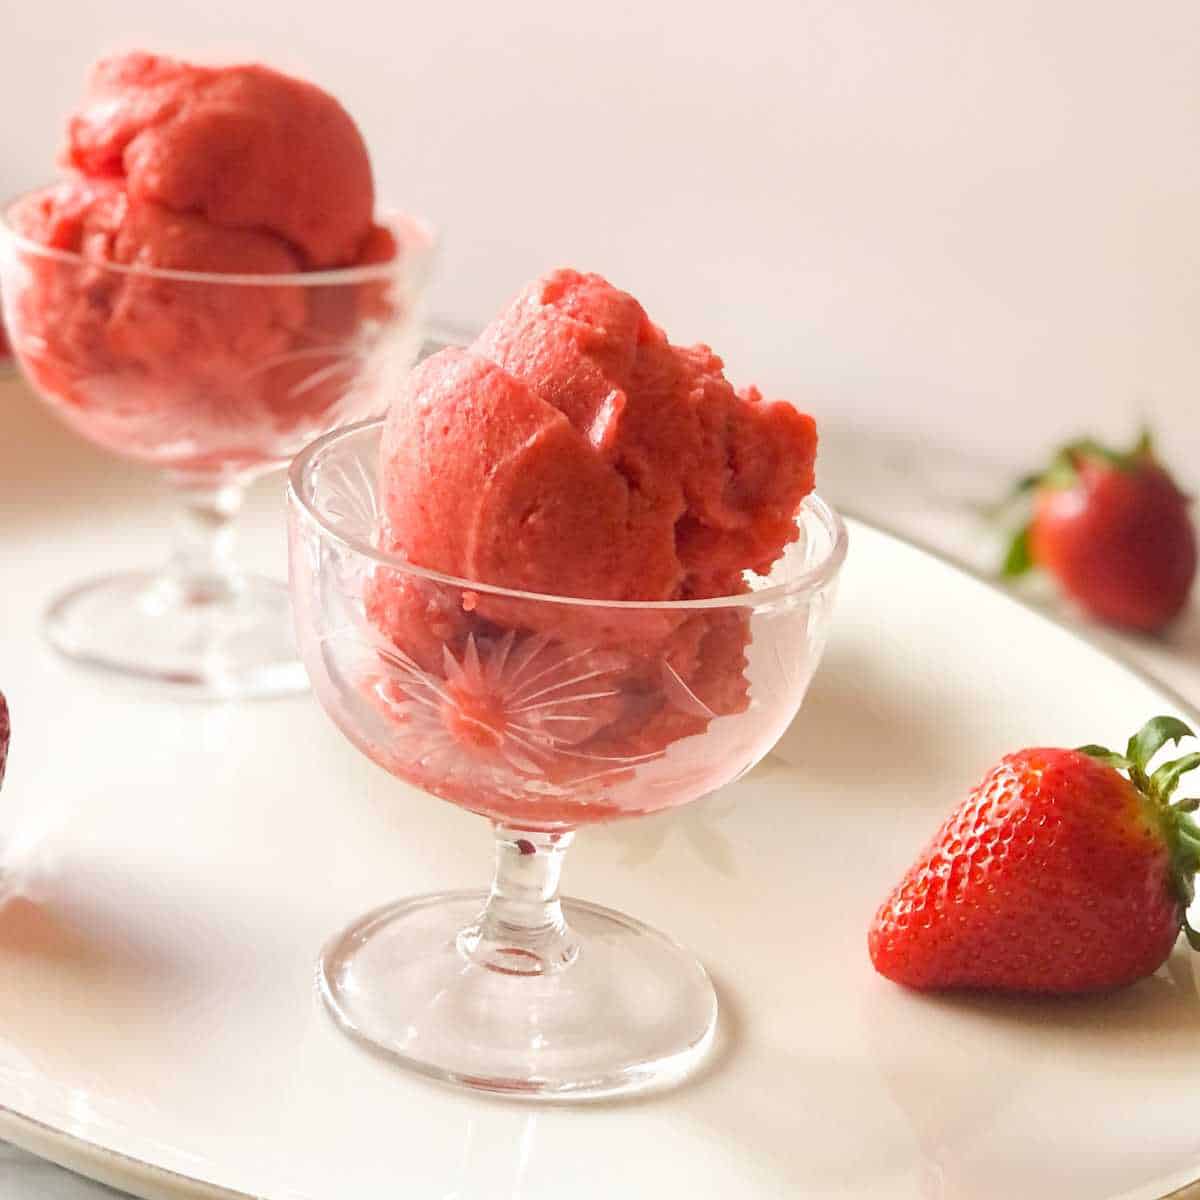 Dairy free sorbet with strawberries in a glass dish.